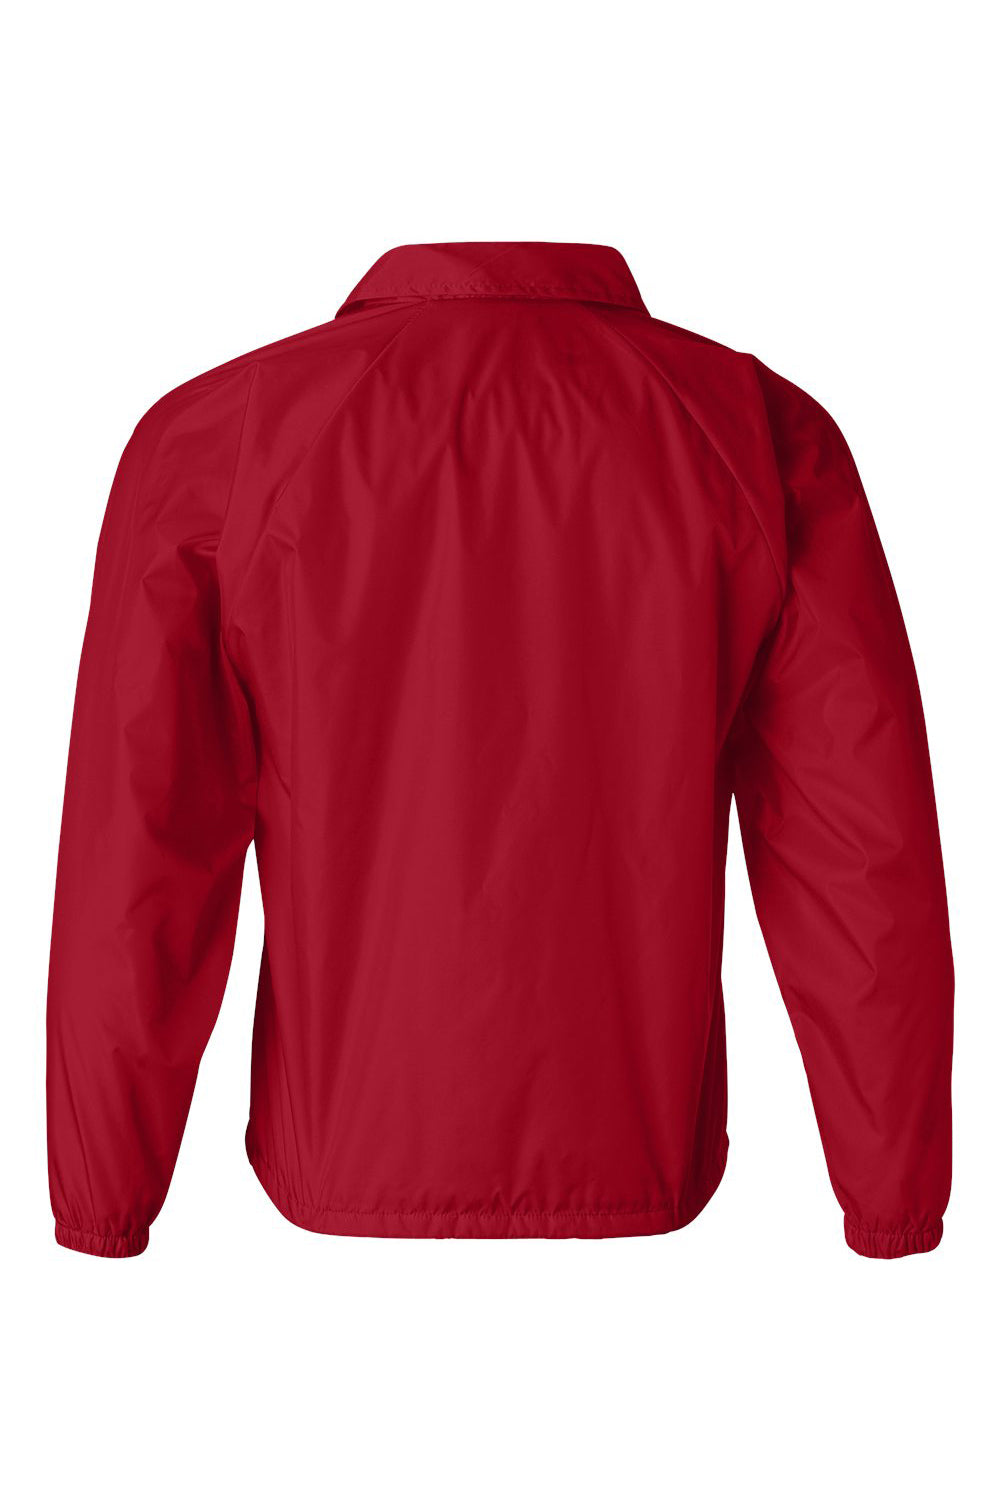 Augusta Sportswear 3100 Mens Water Resistant Snap Down Coaches Jacket Red Flat Back